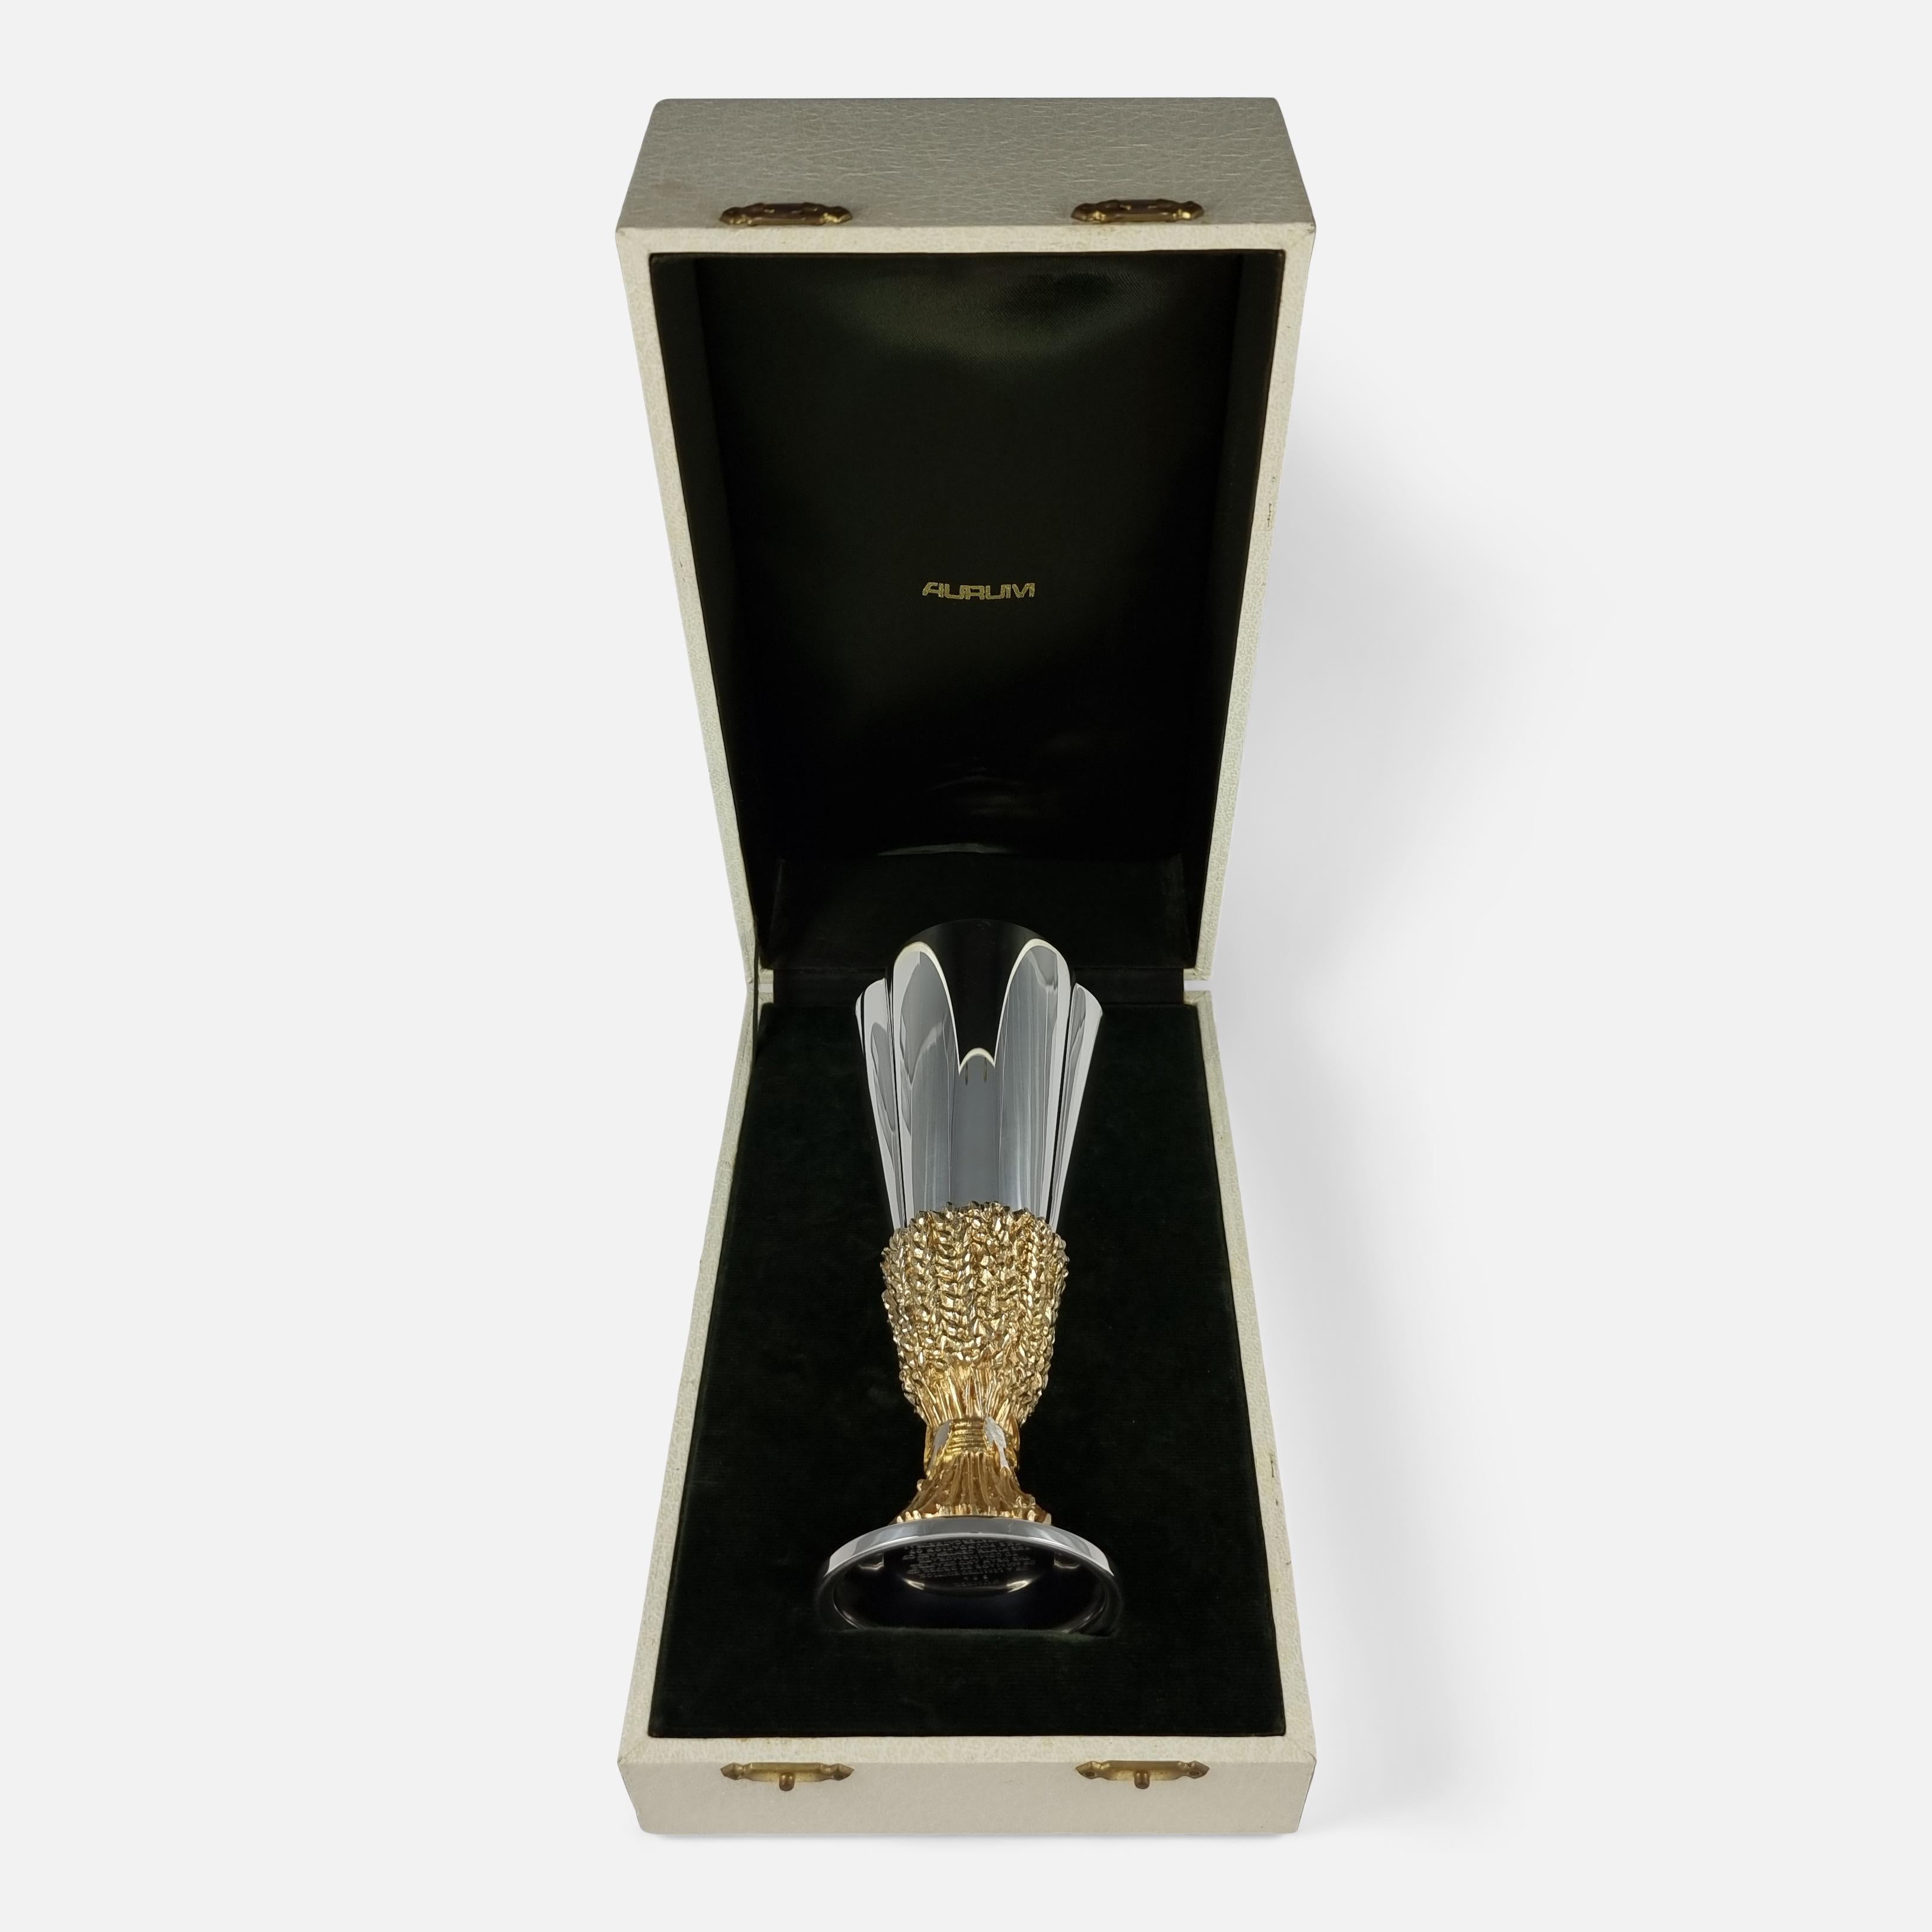 An Elizabeth II Parcel-Gilt Silver Goblet, by Desmond Clen-Murphy for Aurum, London, 1976. It is numbered 304 from a limited edition of 600. The goblet is of tapering trefoil form, the foot cast as wheat sheafs, complete with a band of various